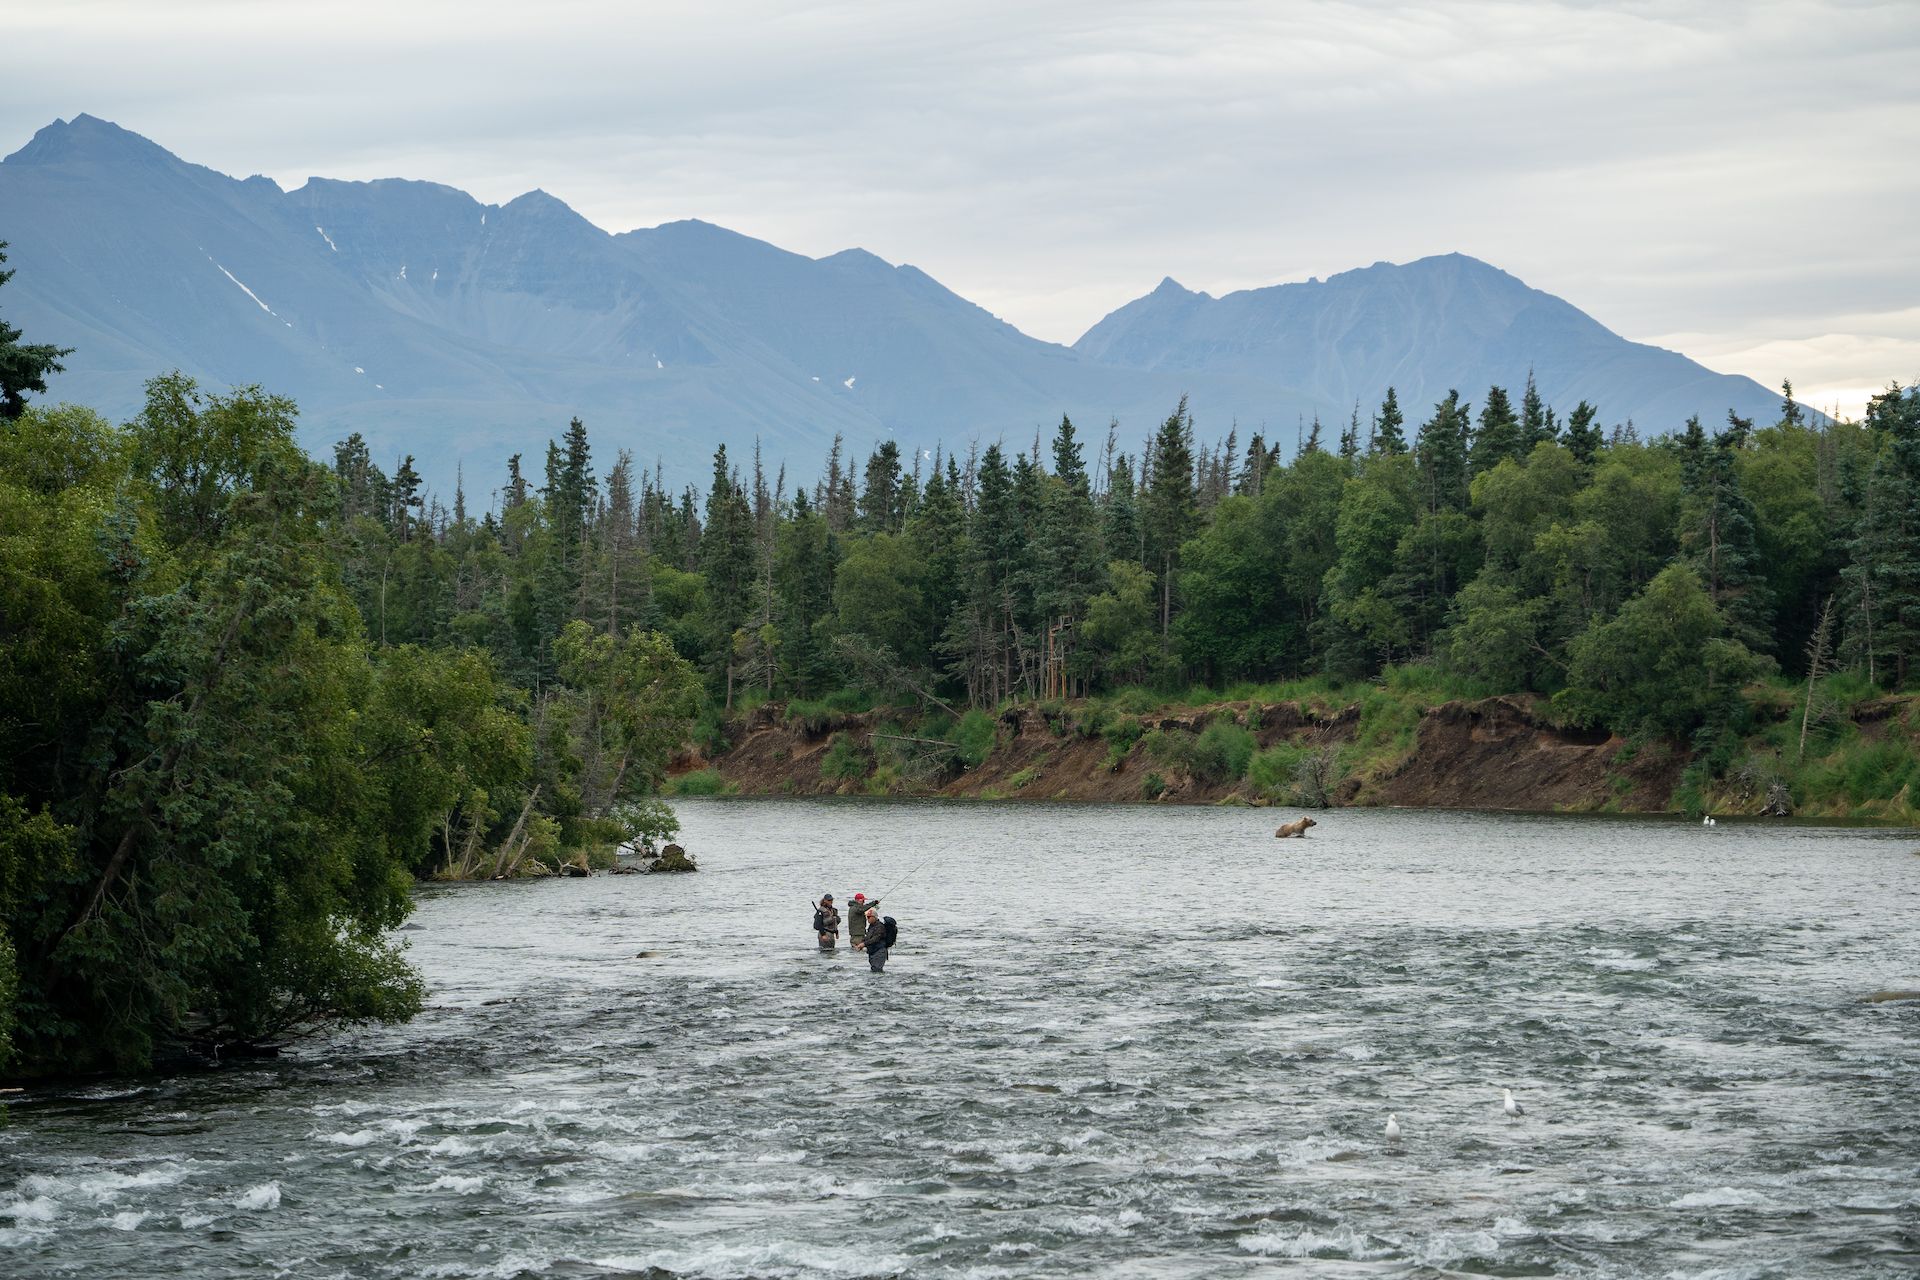 Arriving at the Brooks River and observing a different fishing party fishing a couple hundred yards from a bear. That would be us soon!